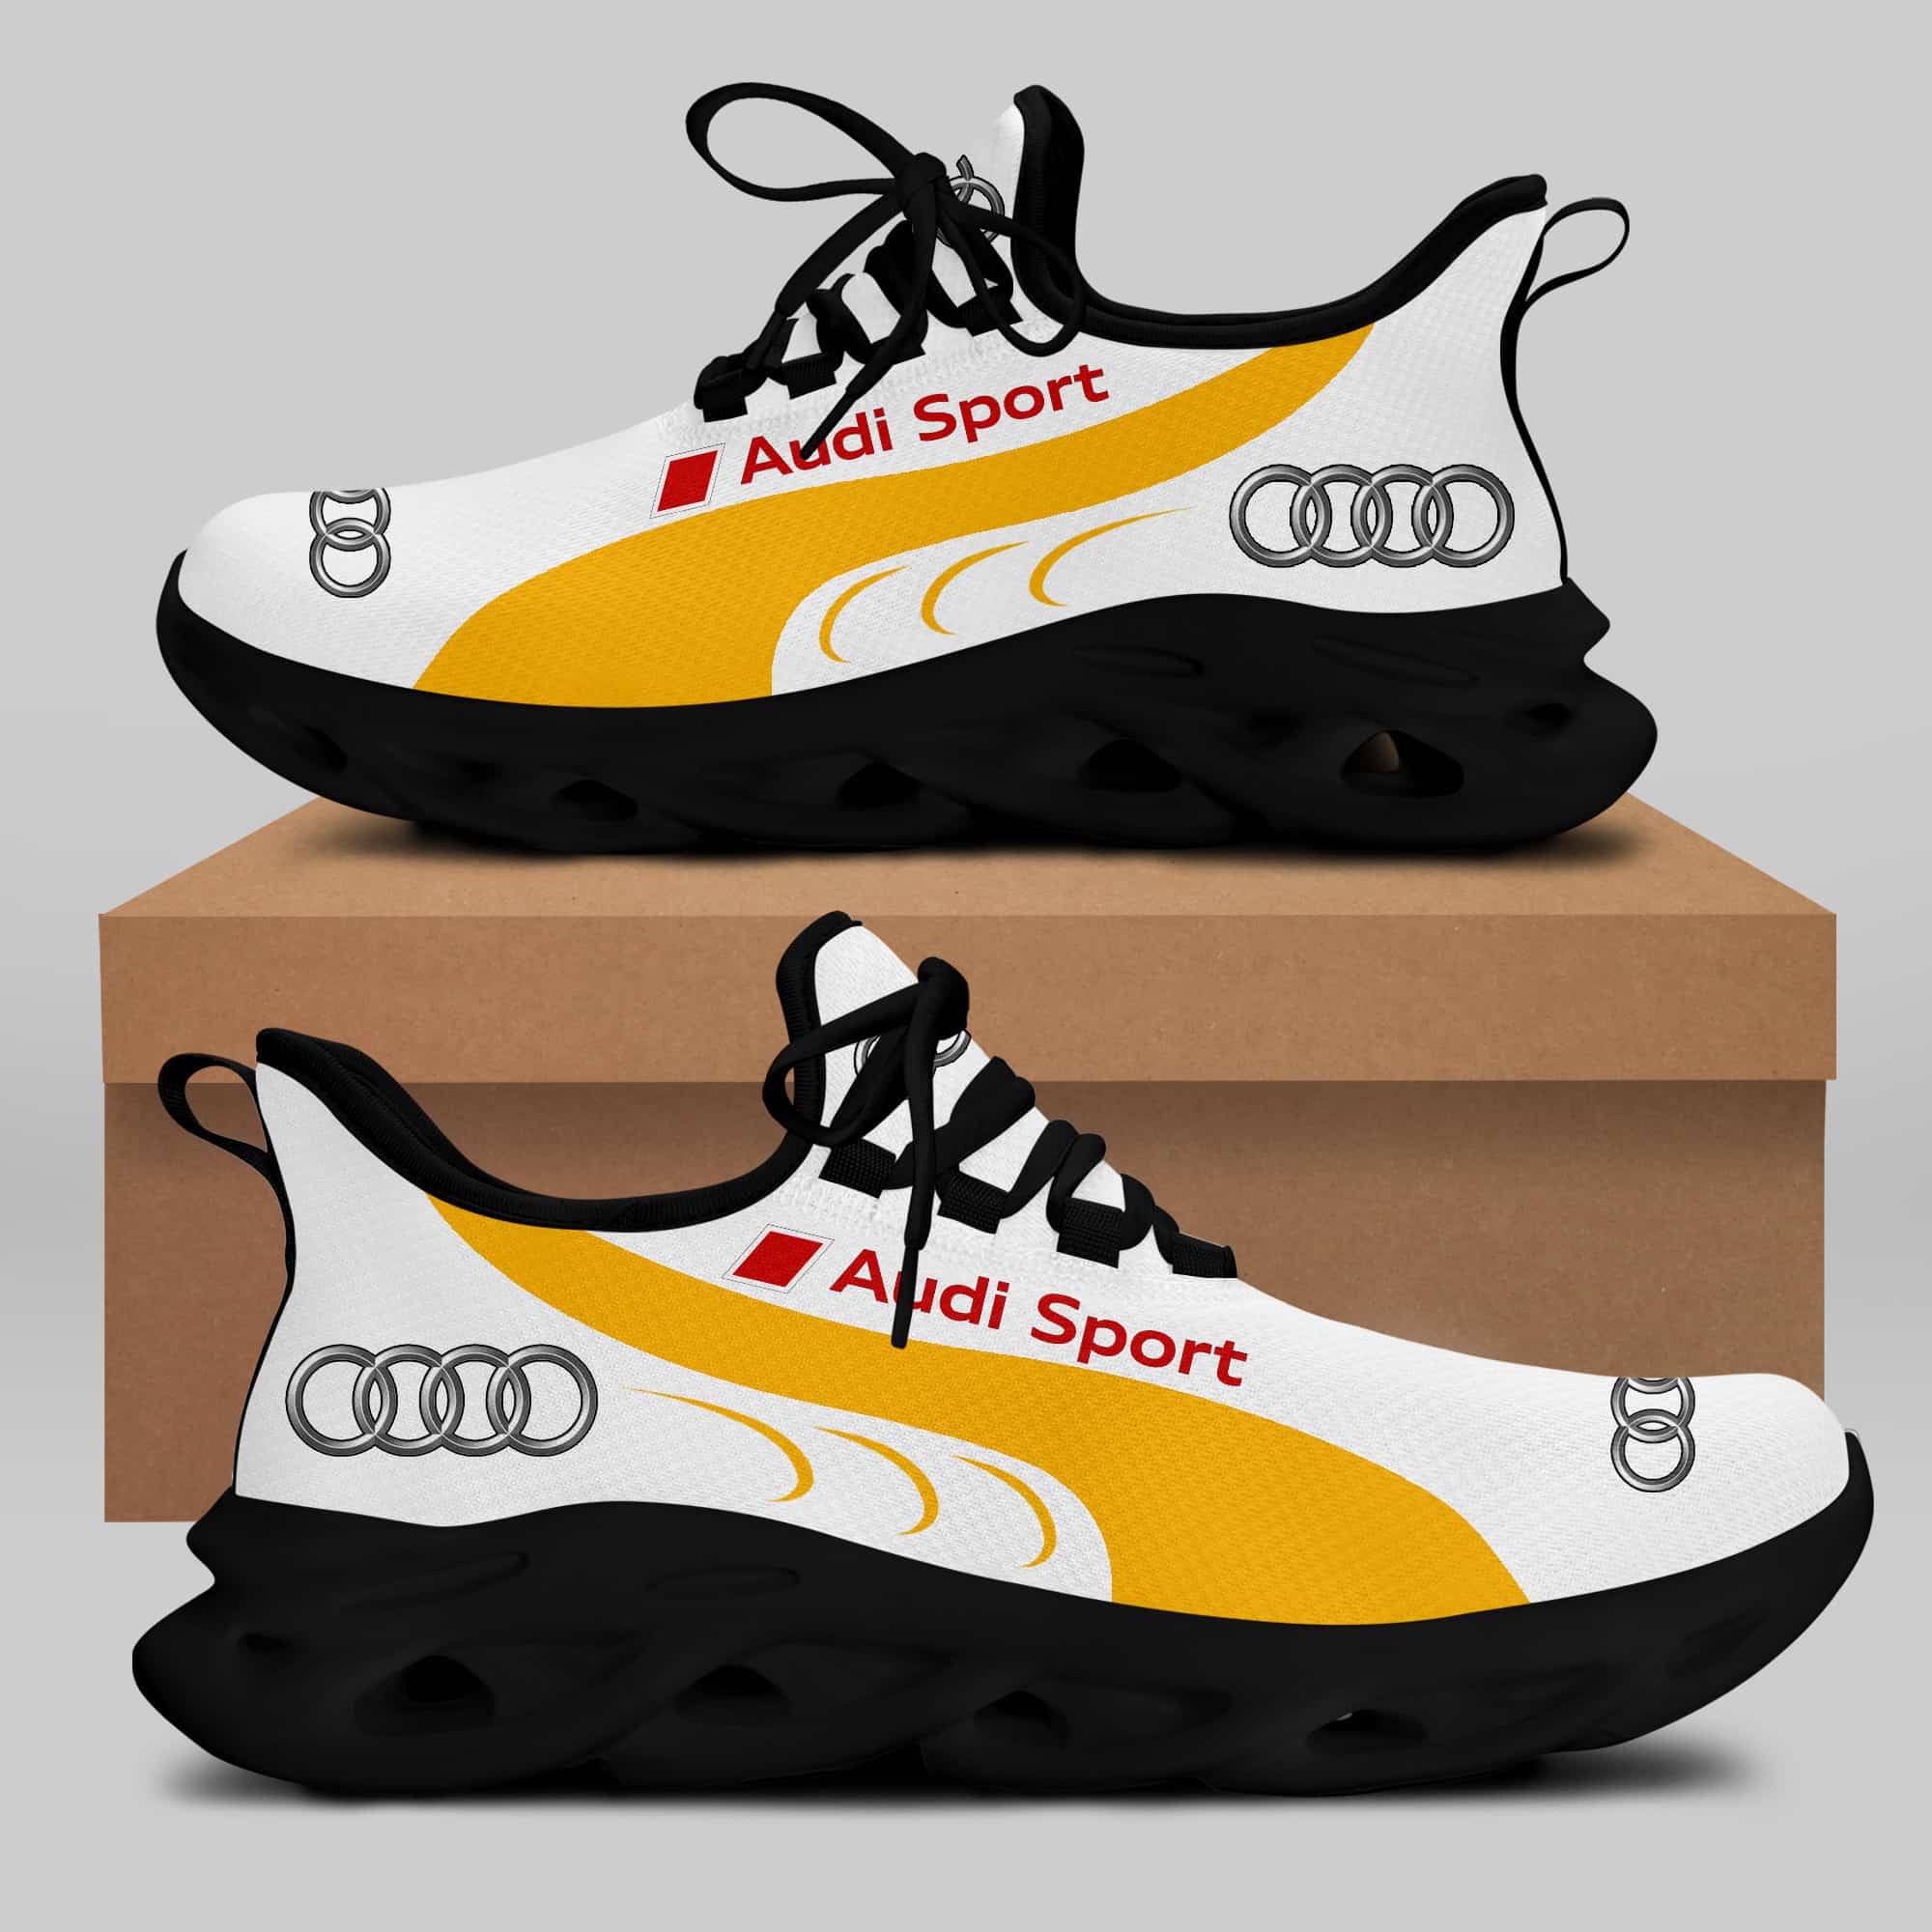 Audi Sport Running Shoes Max Soul Shoes Sneakers Ver 24 2